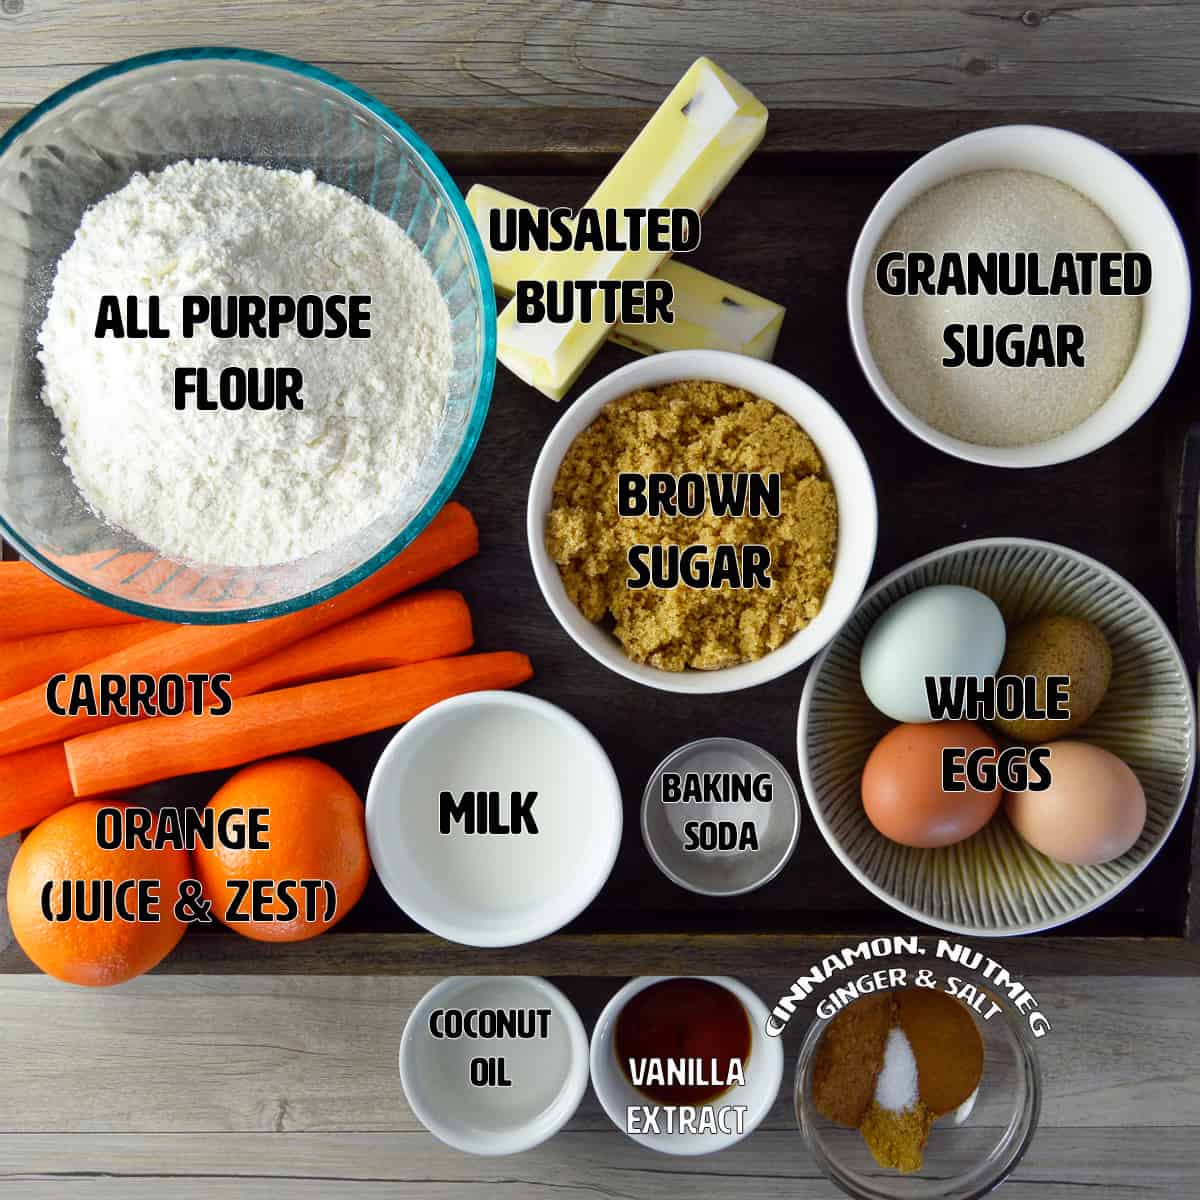 Ingredients for Orange Carrot Cake shown on wooden tray on counter: flour, butter, sugar, brown sugar, carrots, oranges, milk, baking soda, coconut oil, vanilla extract, eggs and spices